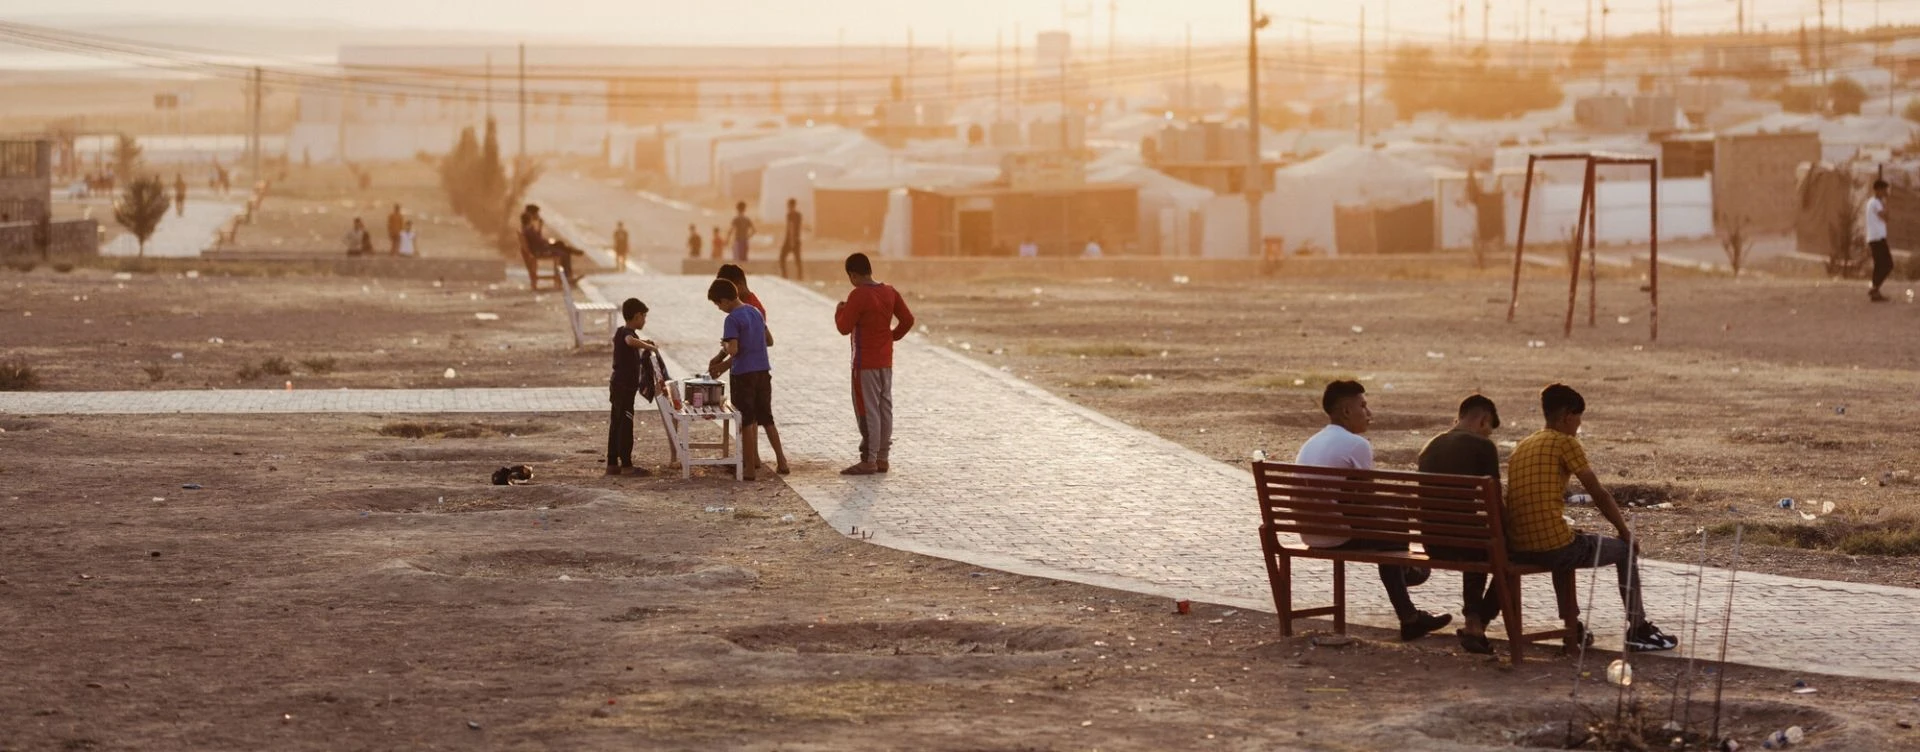 People outside at dusk in Iraq.